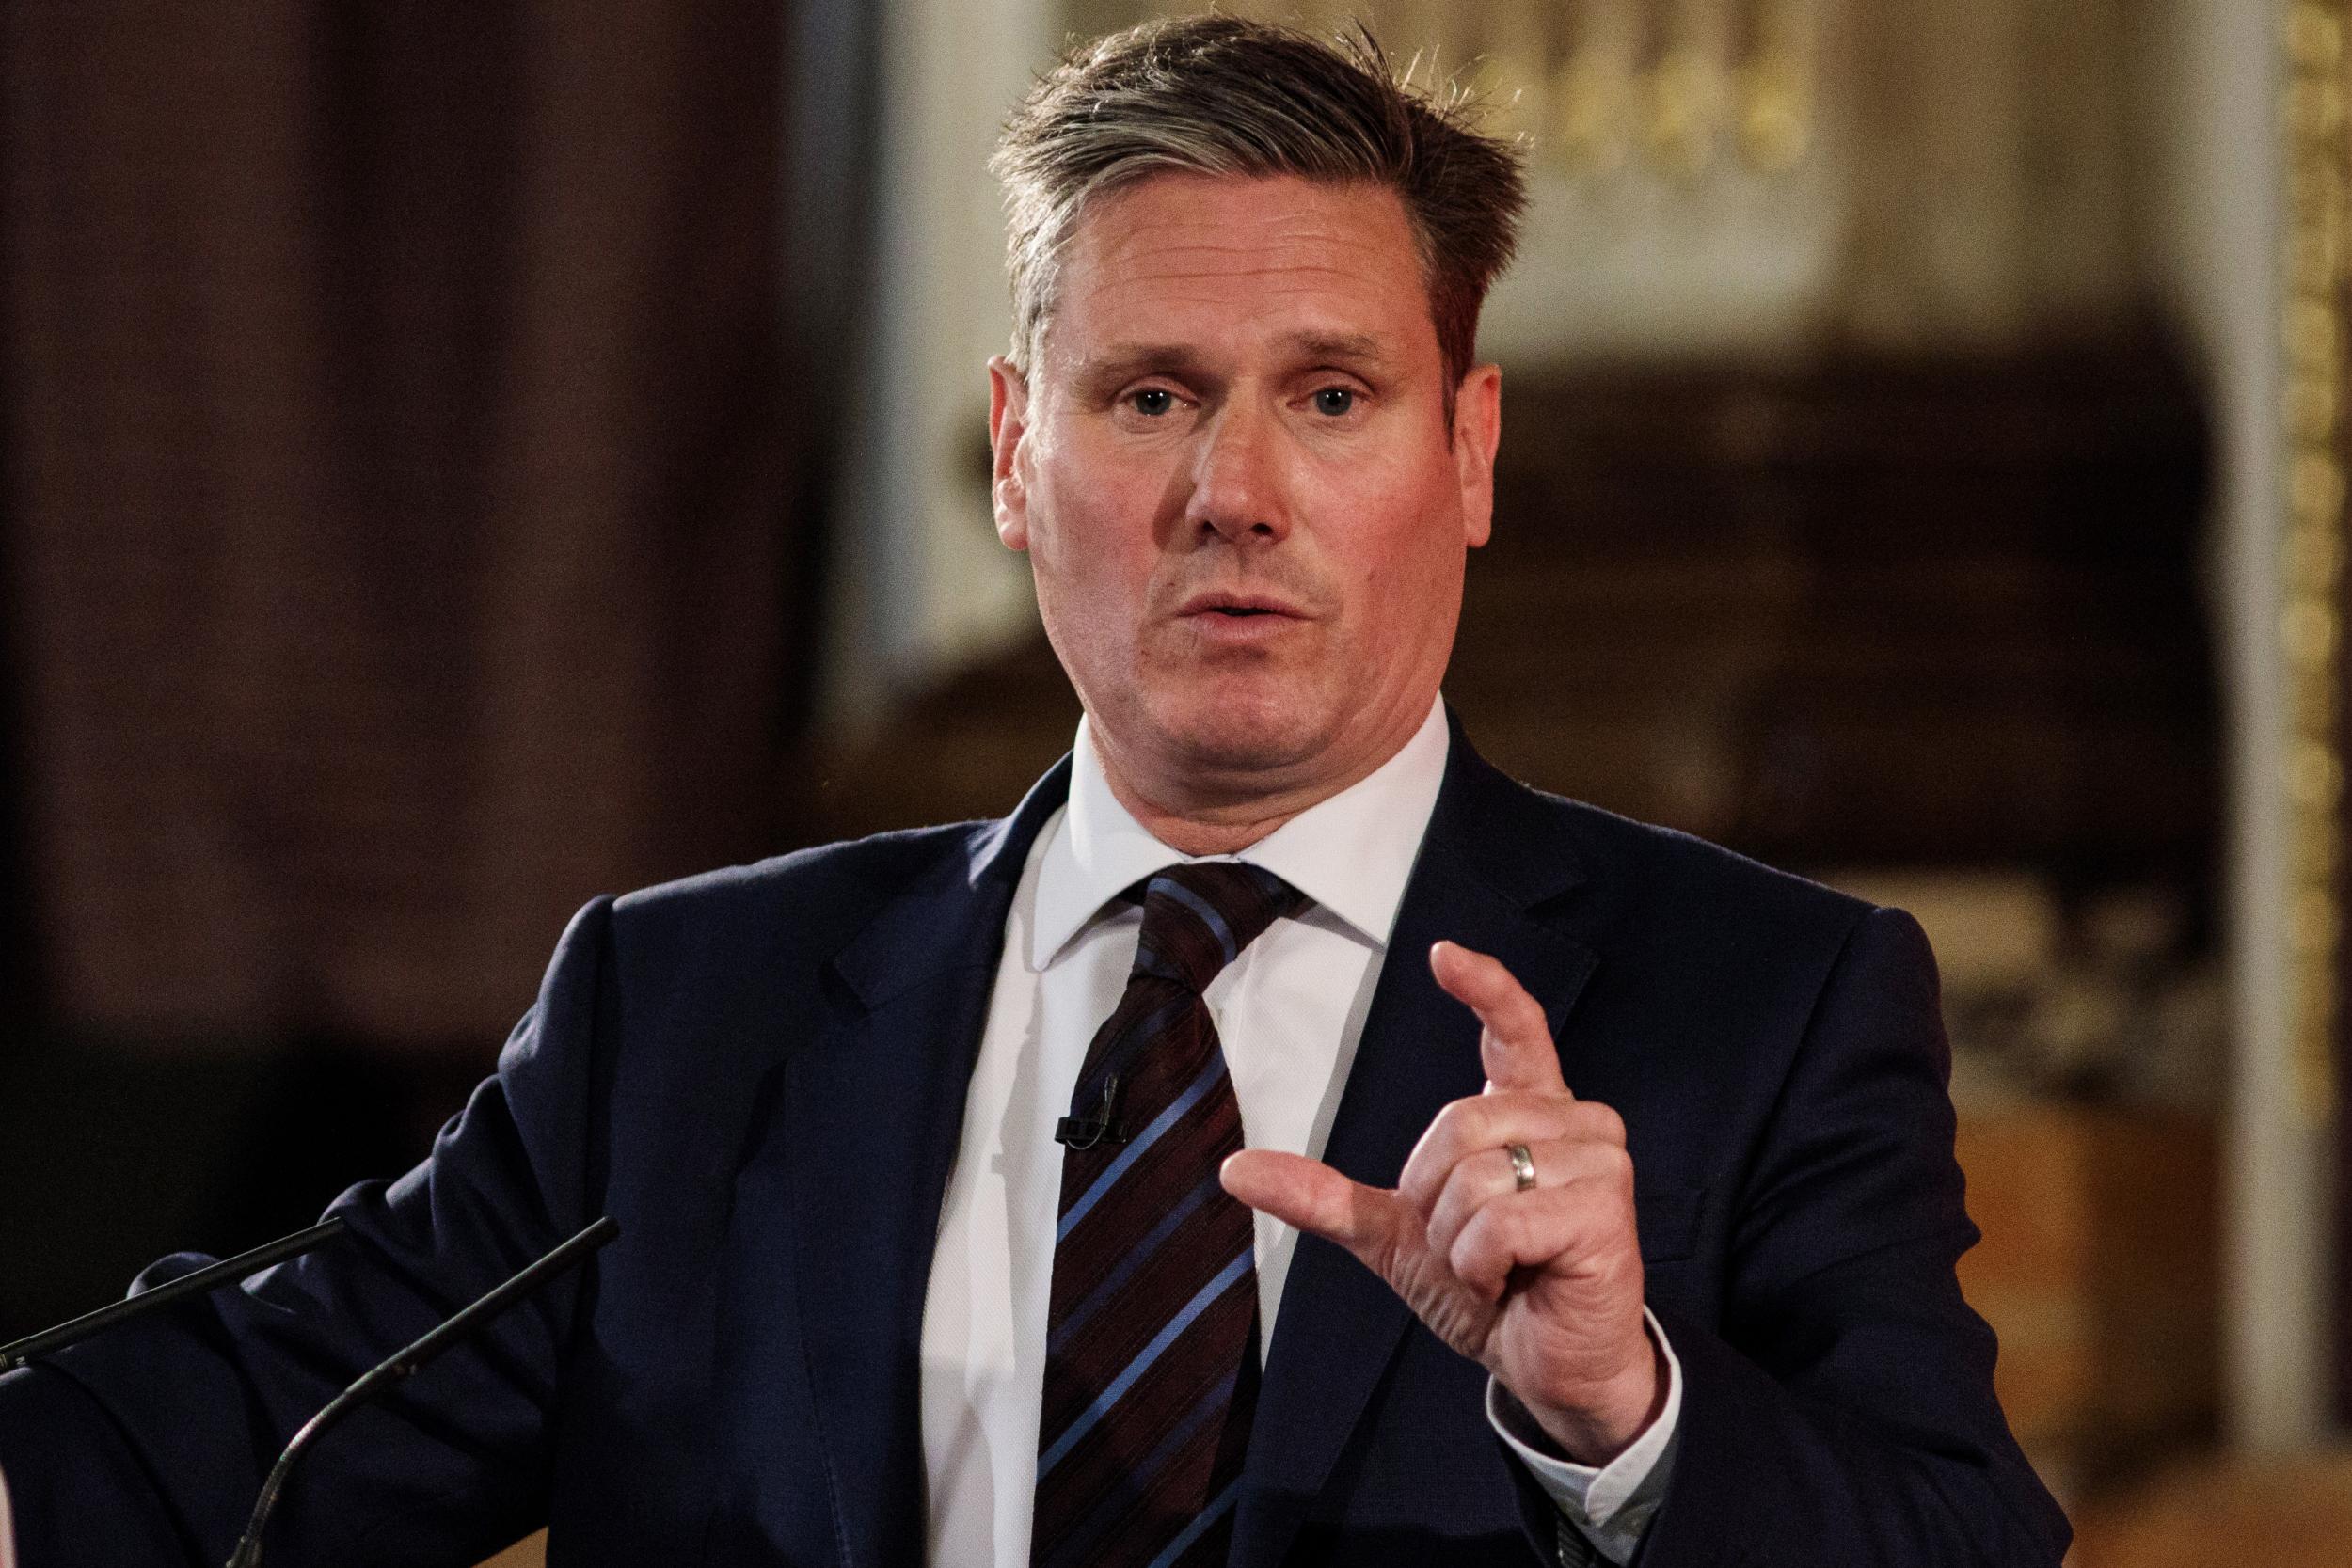 Shadow Brexit Secretary Keir Starmer said it was the ‘least worst option’ for the economy